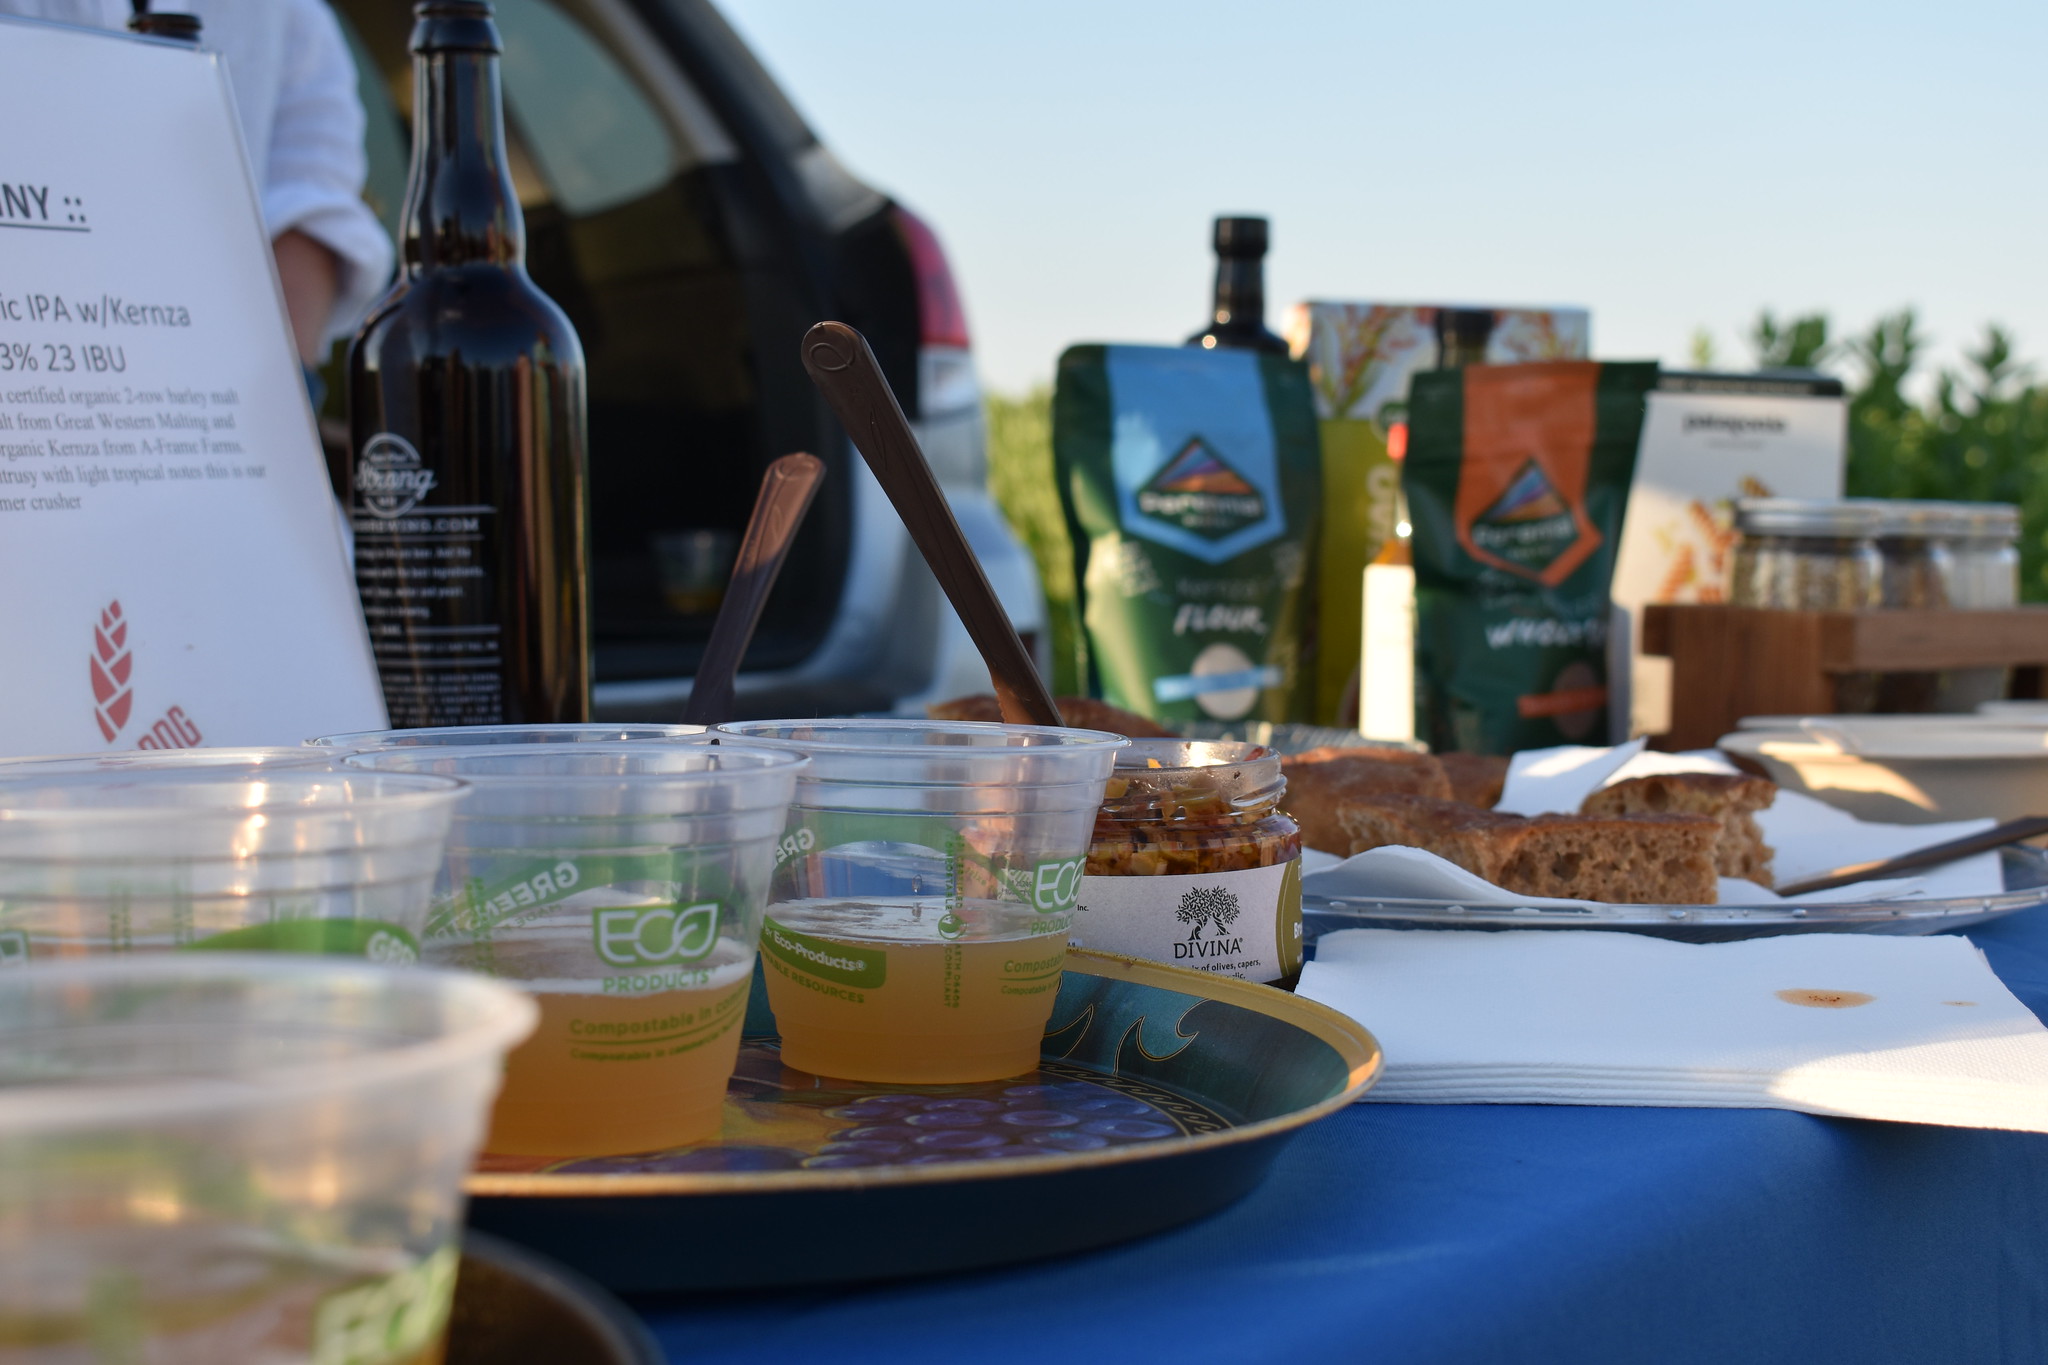 Food and drink products made with clean-water crops such as Kernza, all displayed on a table outdoors.